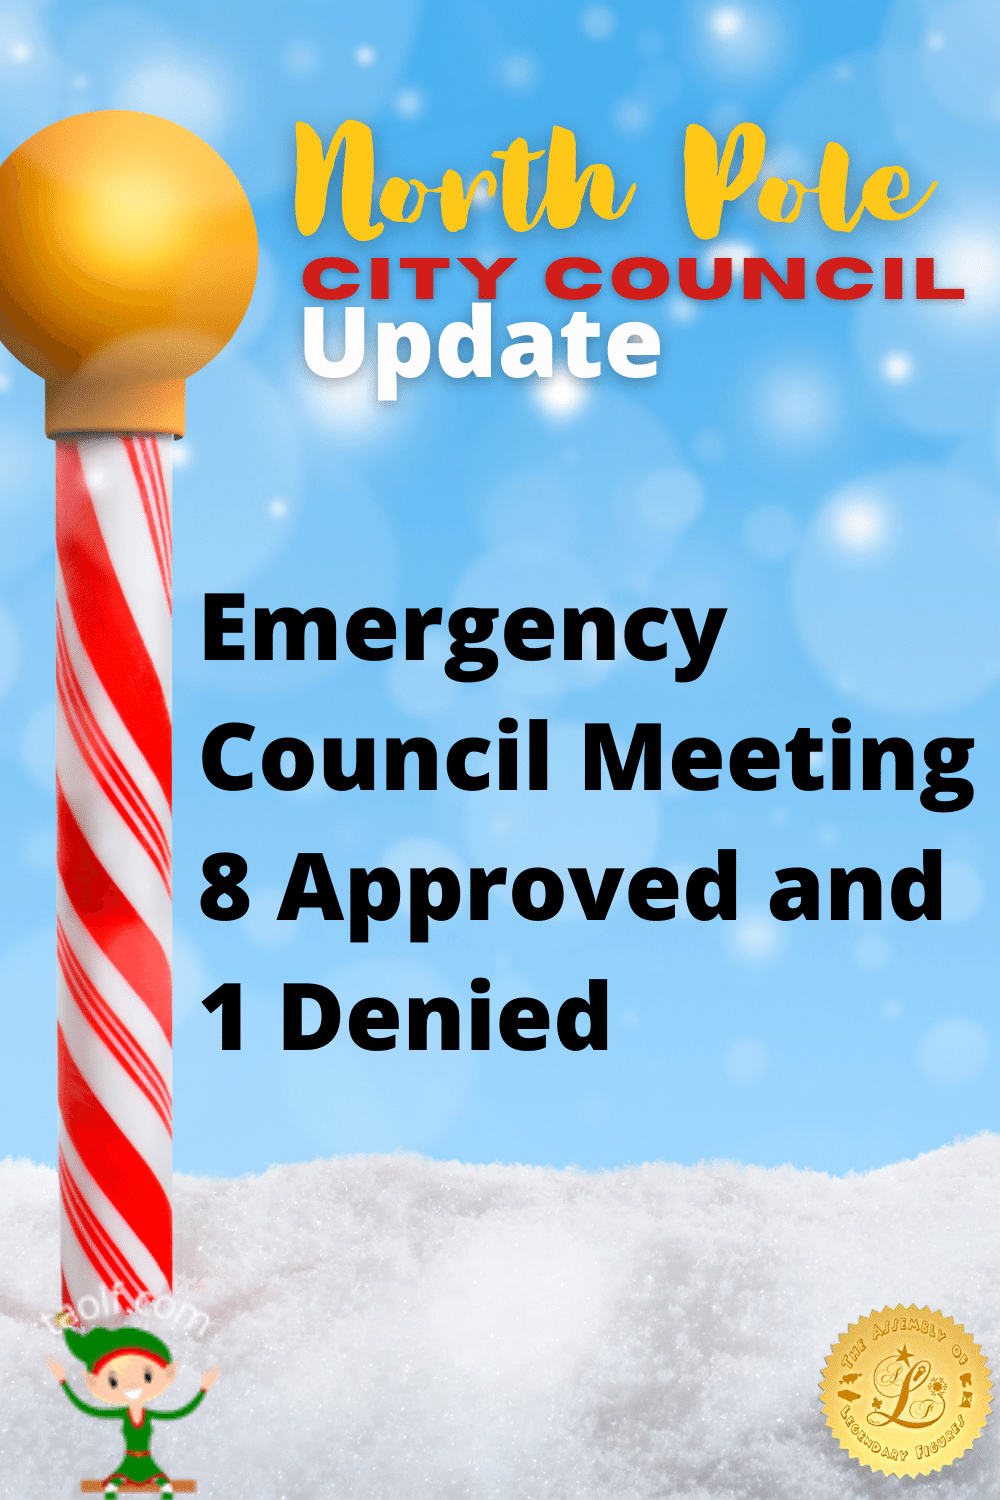 Council Meeting - 8 Approved and 1 Denied